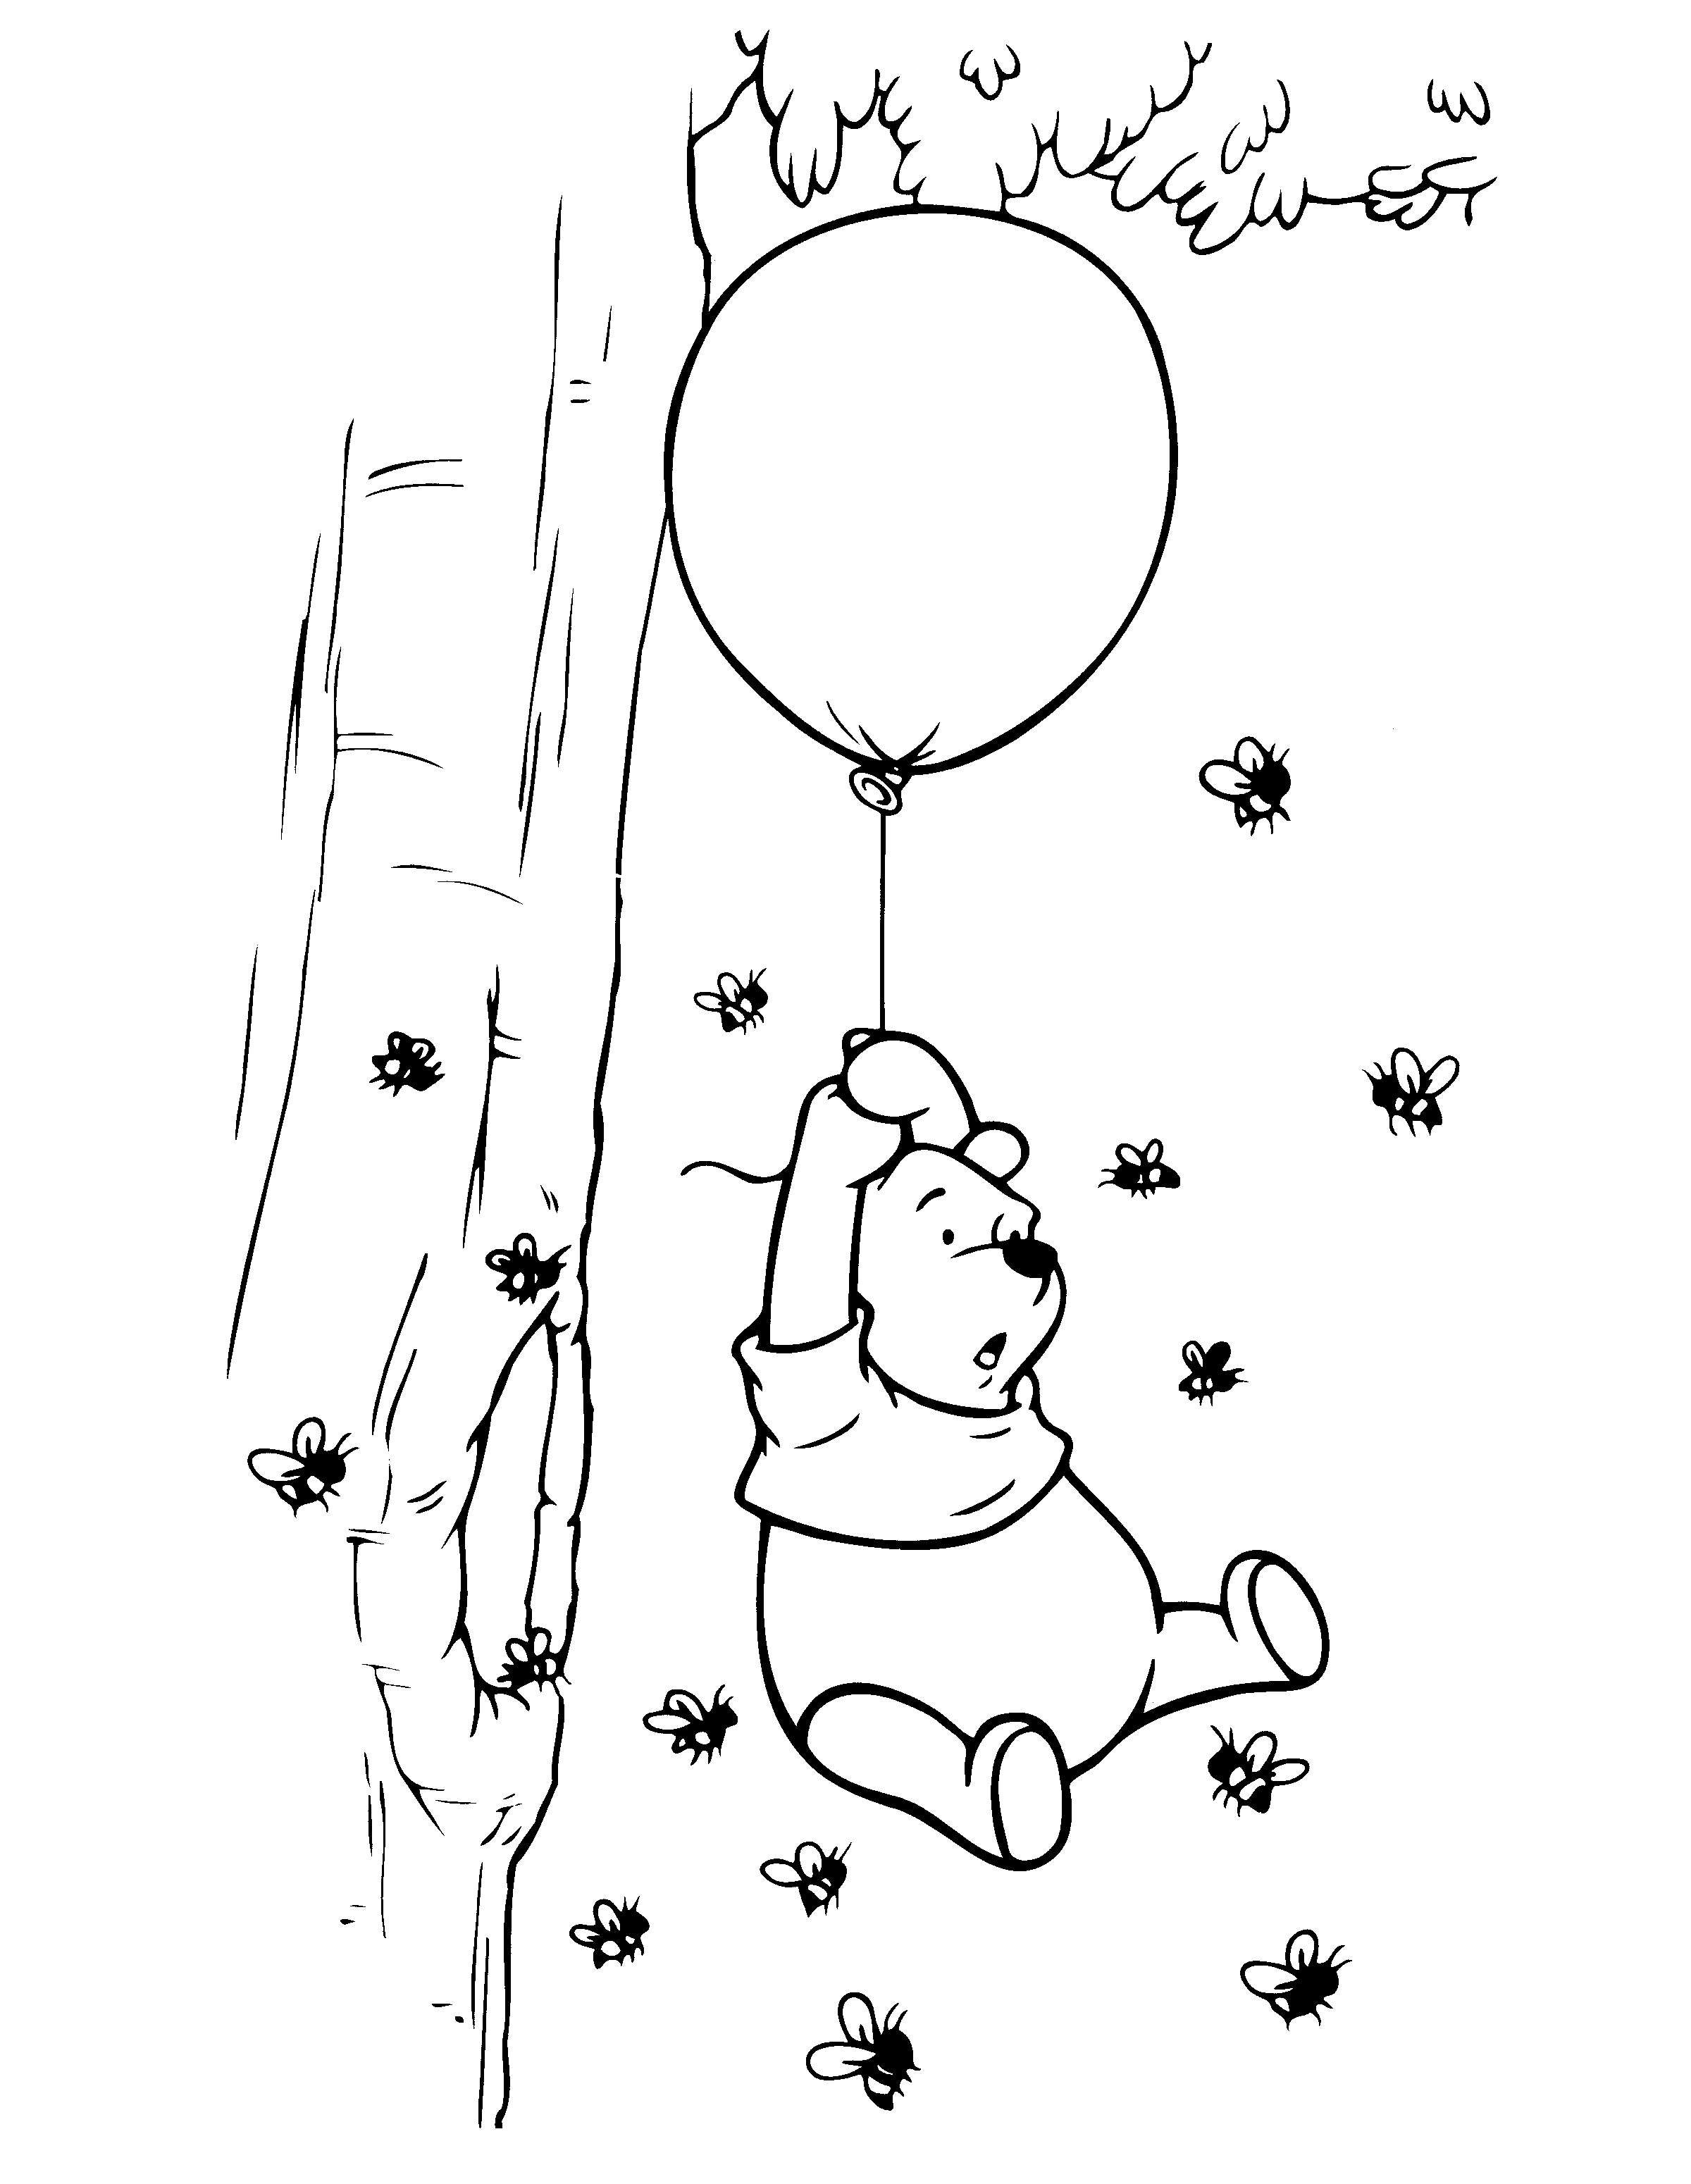 Winnie the pooh Coloring Pages